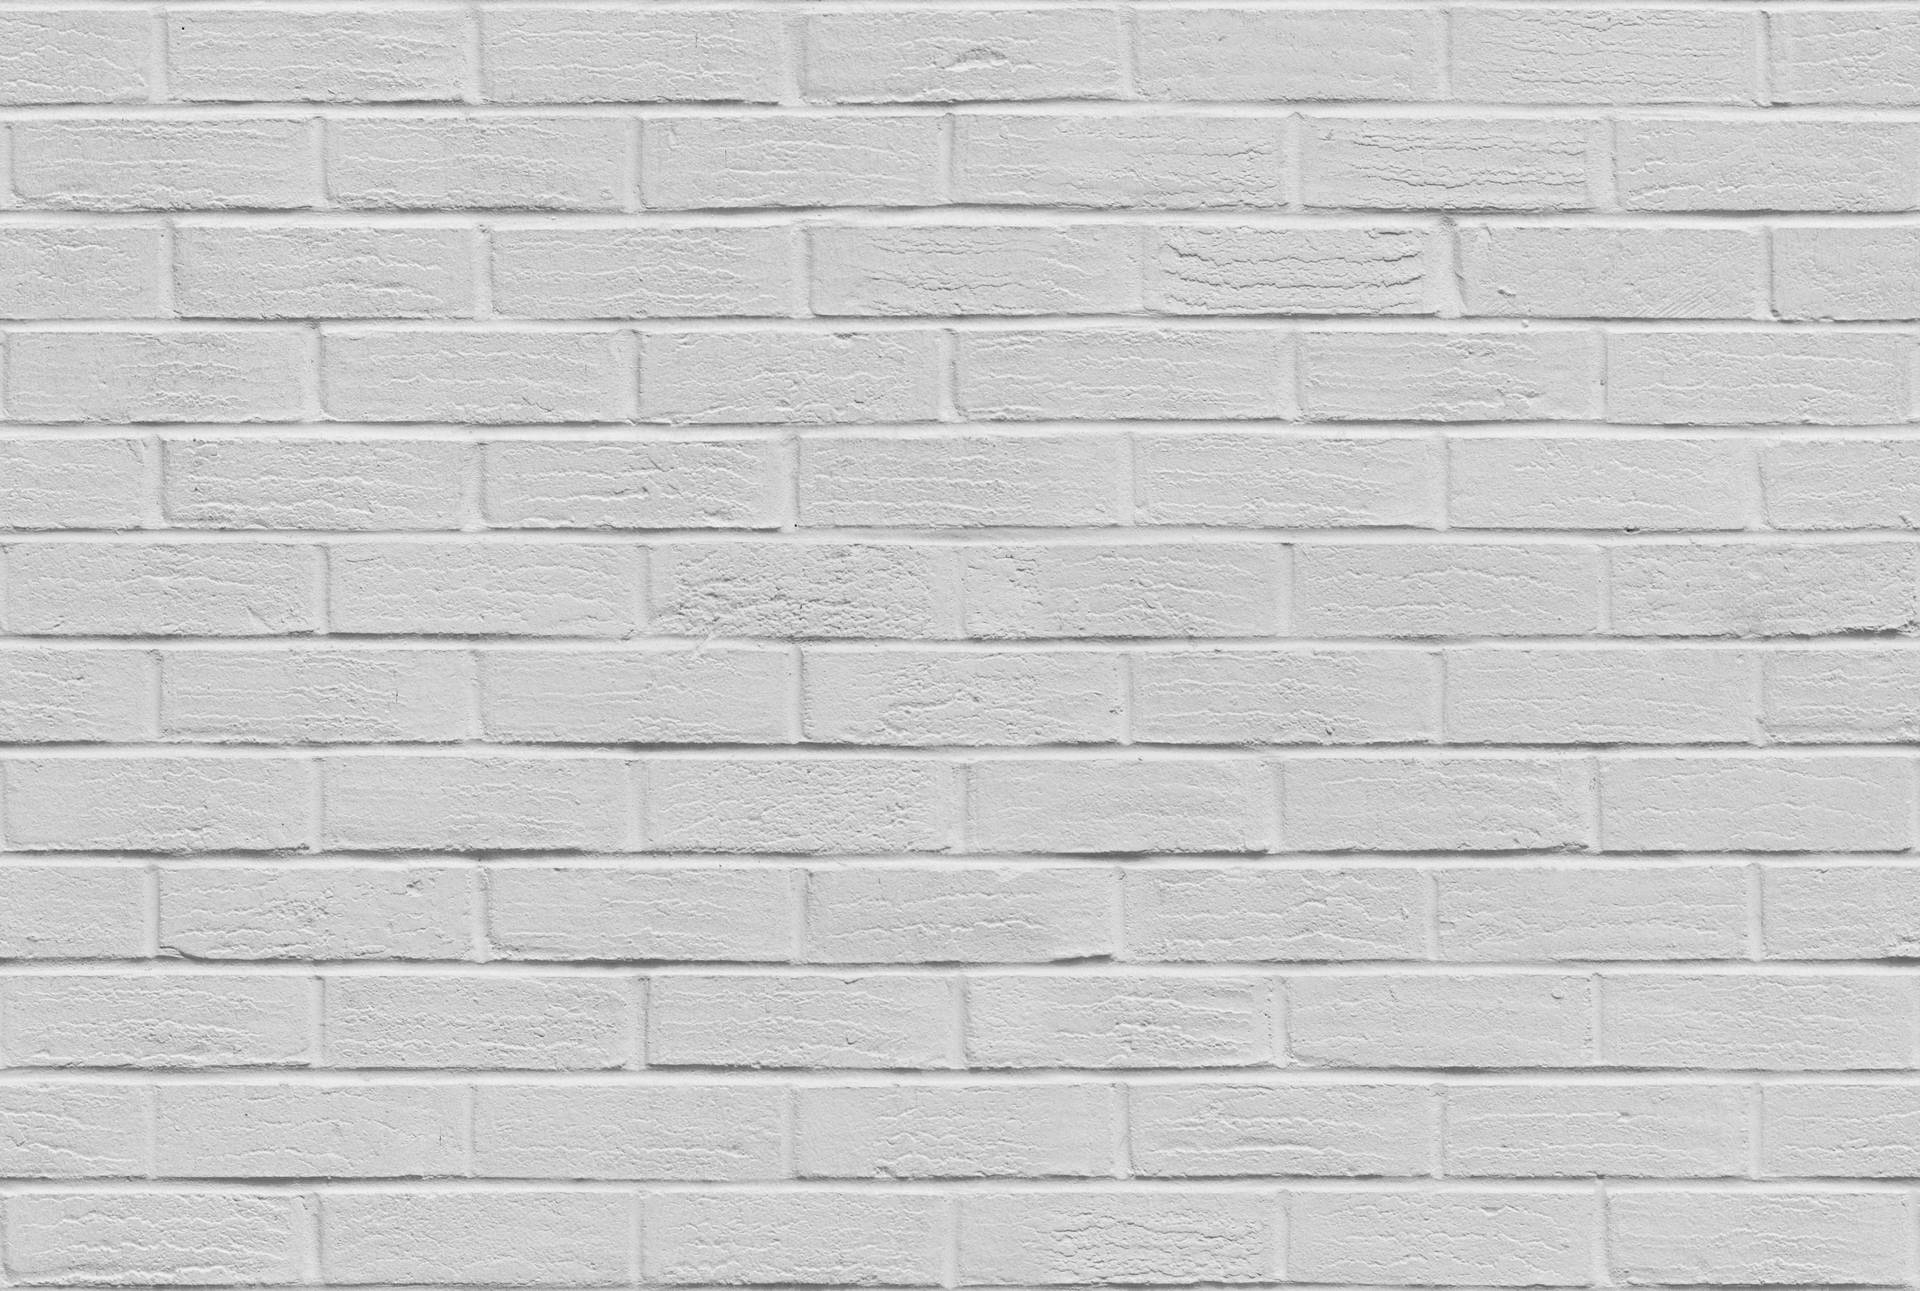 White Brick 5183X3484 Wallpaper and Background Image